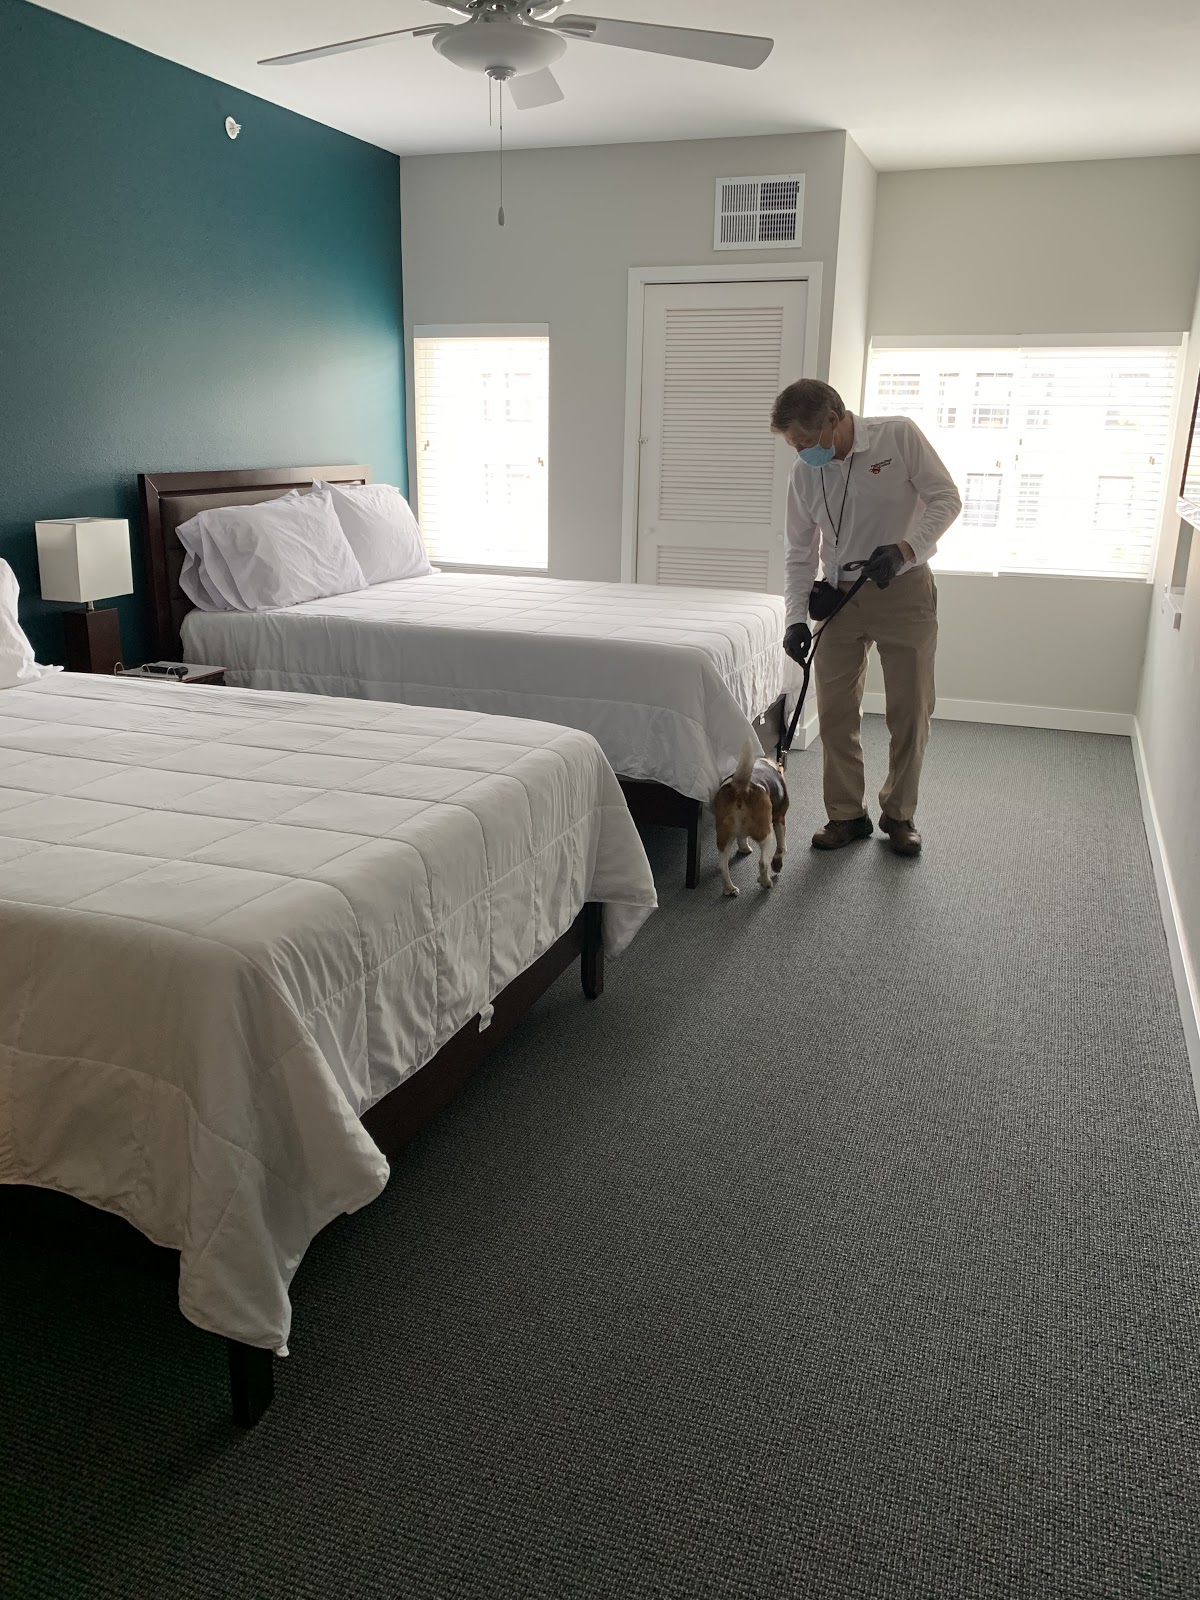 Bed bug detection dog and exterminator performing search